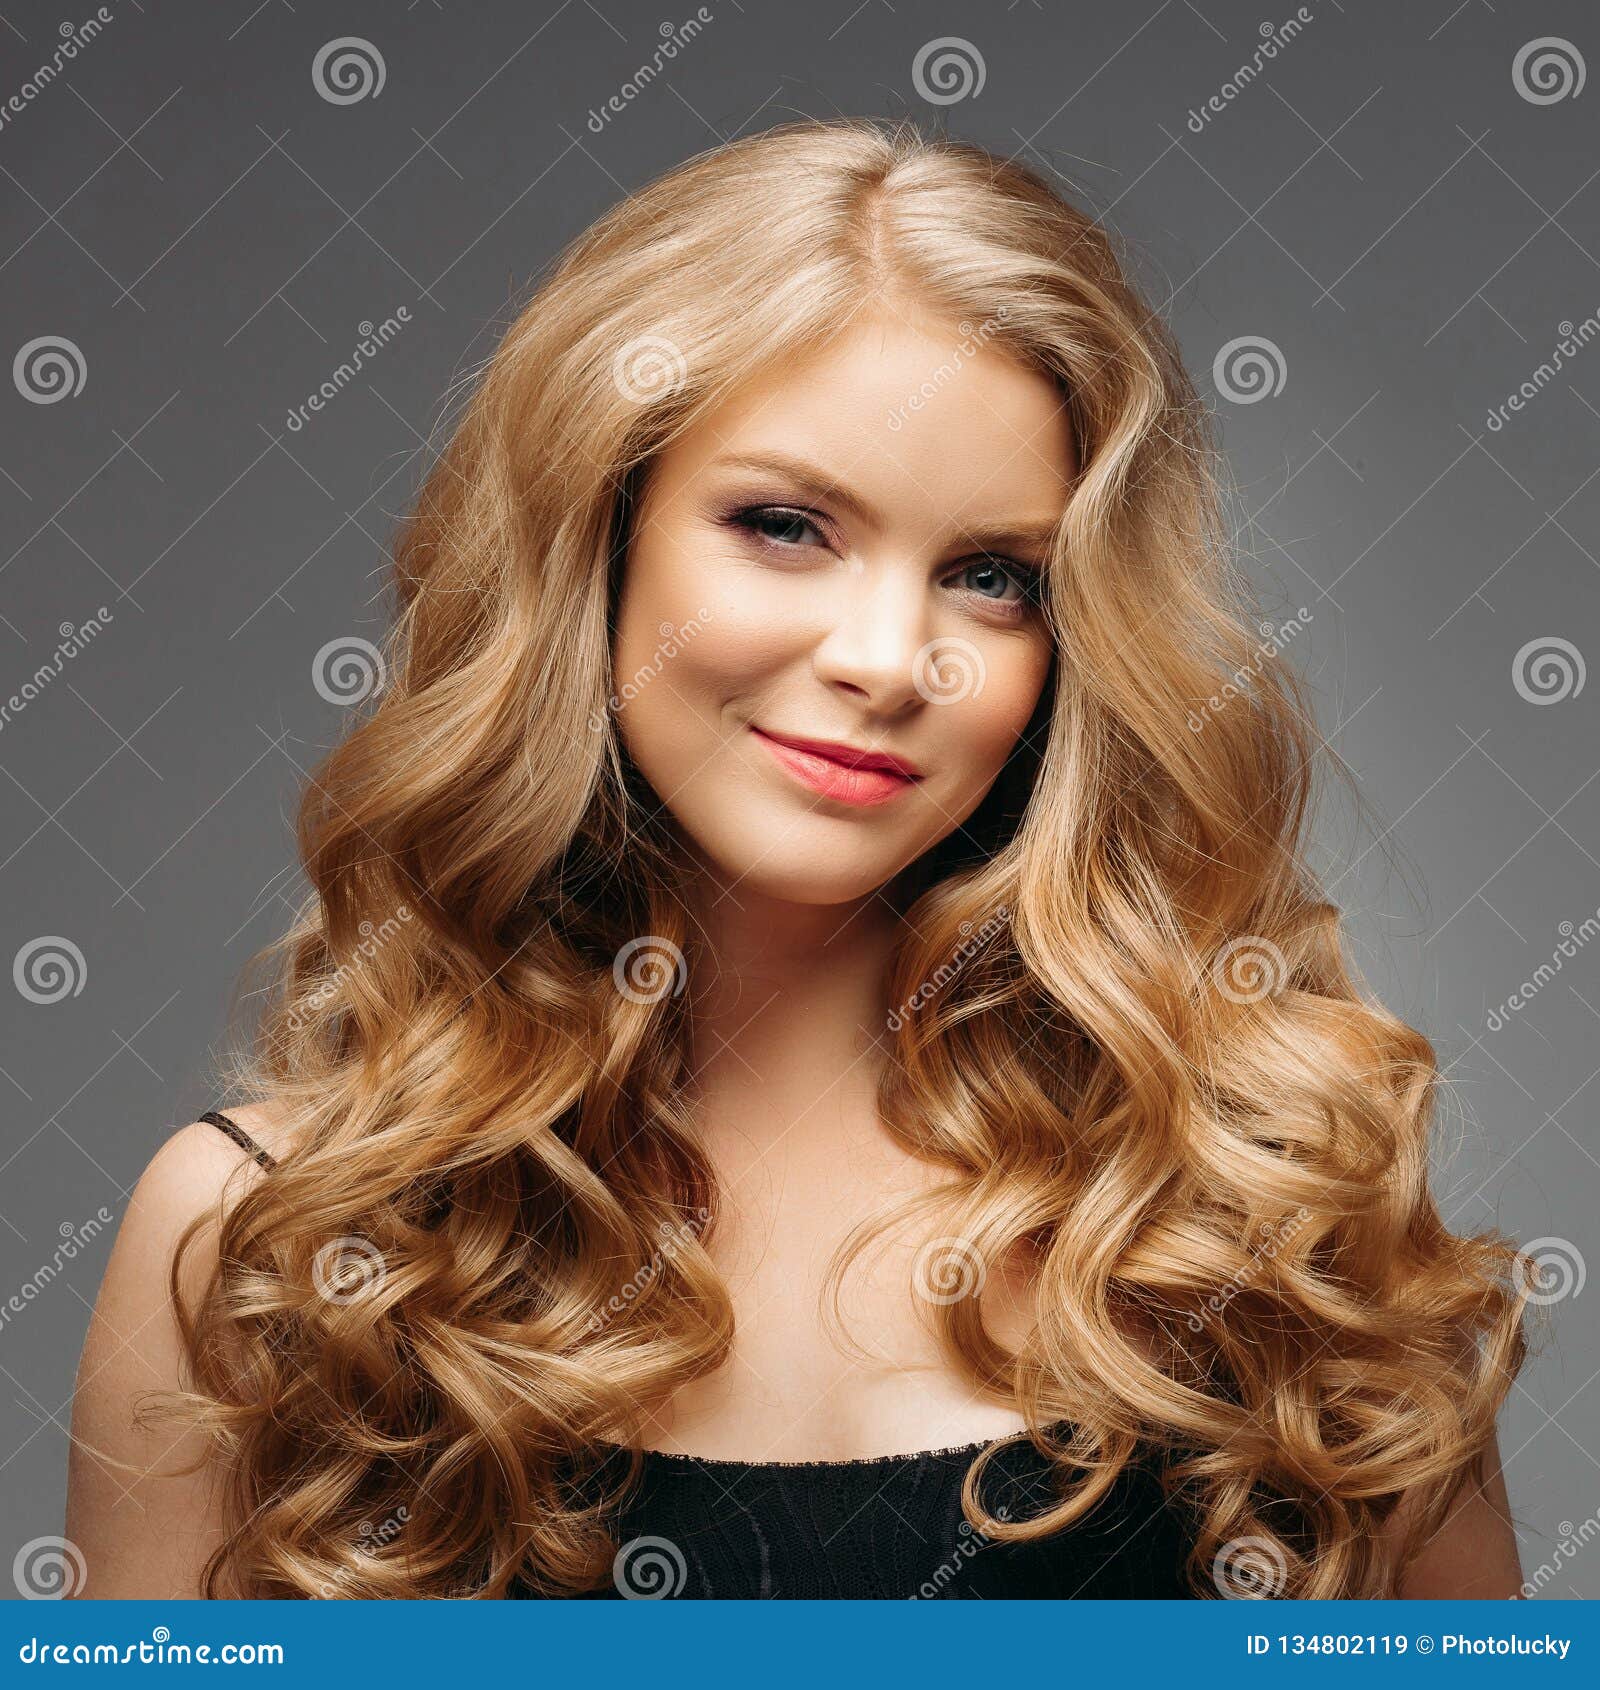 Stunning Natural Beauty with Blonde Wavy Hair. Stock Image - Image of blonde,  health: 134802119